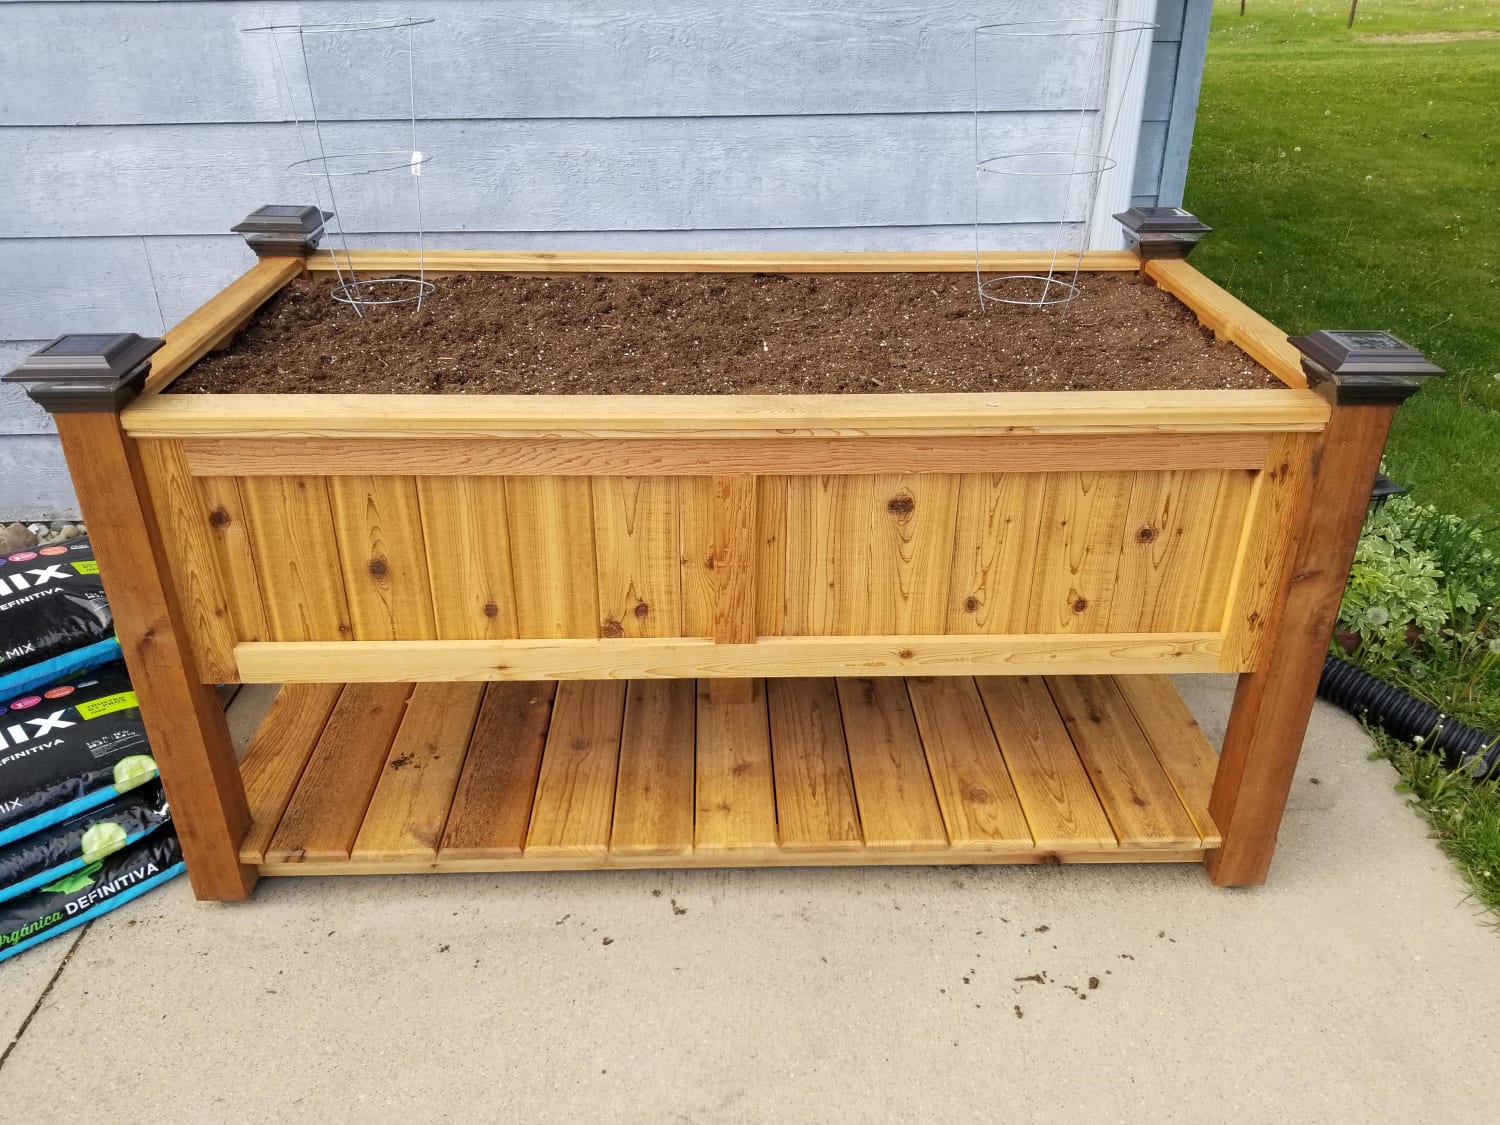 Daughter wanted a raised garden for her birthday so I made one out of cedar. Still a little cold yet to plant, maybe 2 more weeks. She is super excited to start her own garden. She wants to learn how to grow and cook her own vegetables